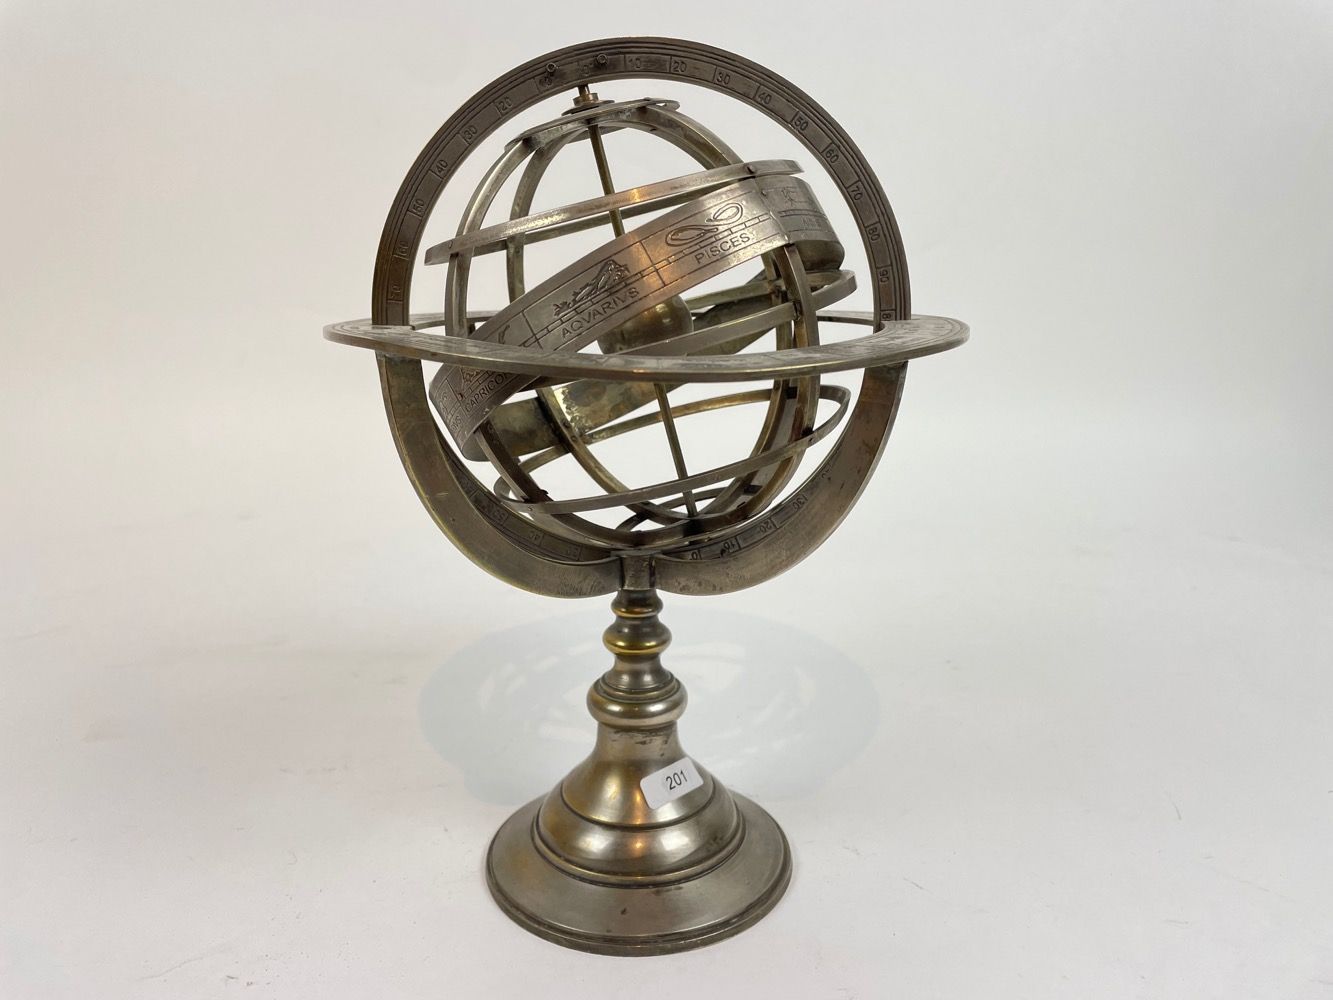 Null Armillary sphere, 20th-21st century, silver-plated metal, h. 25 cm.